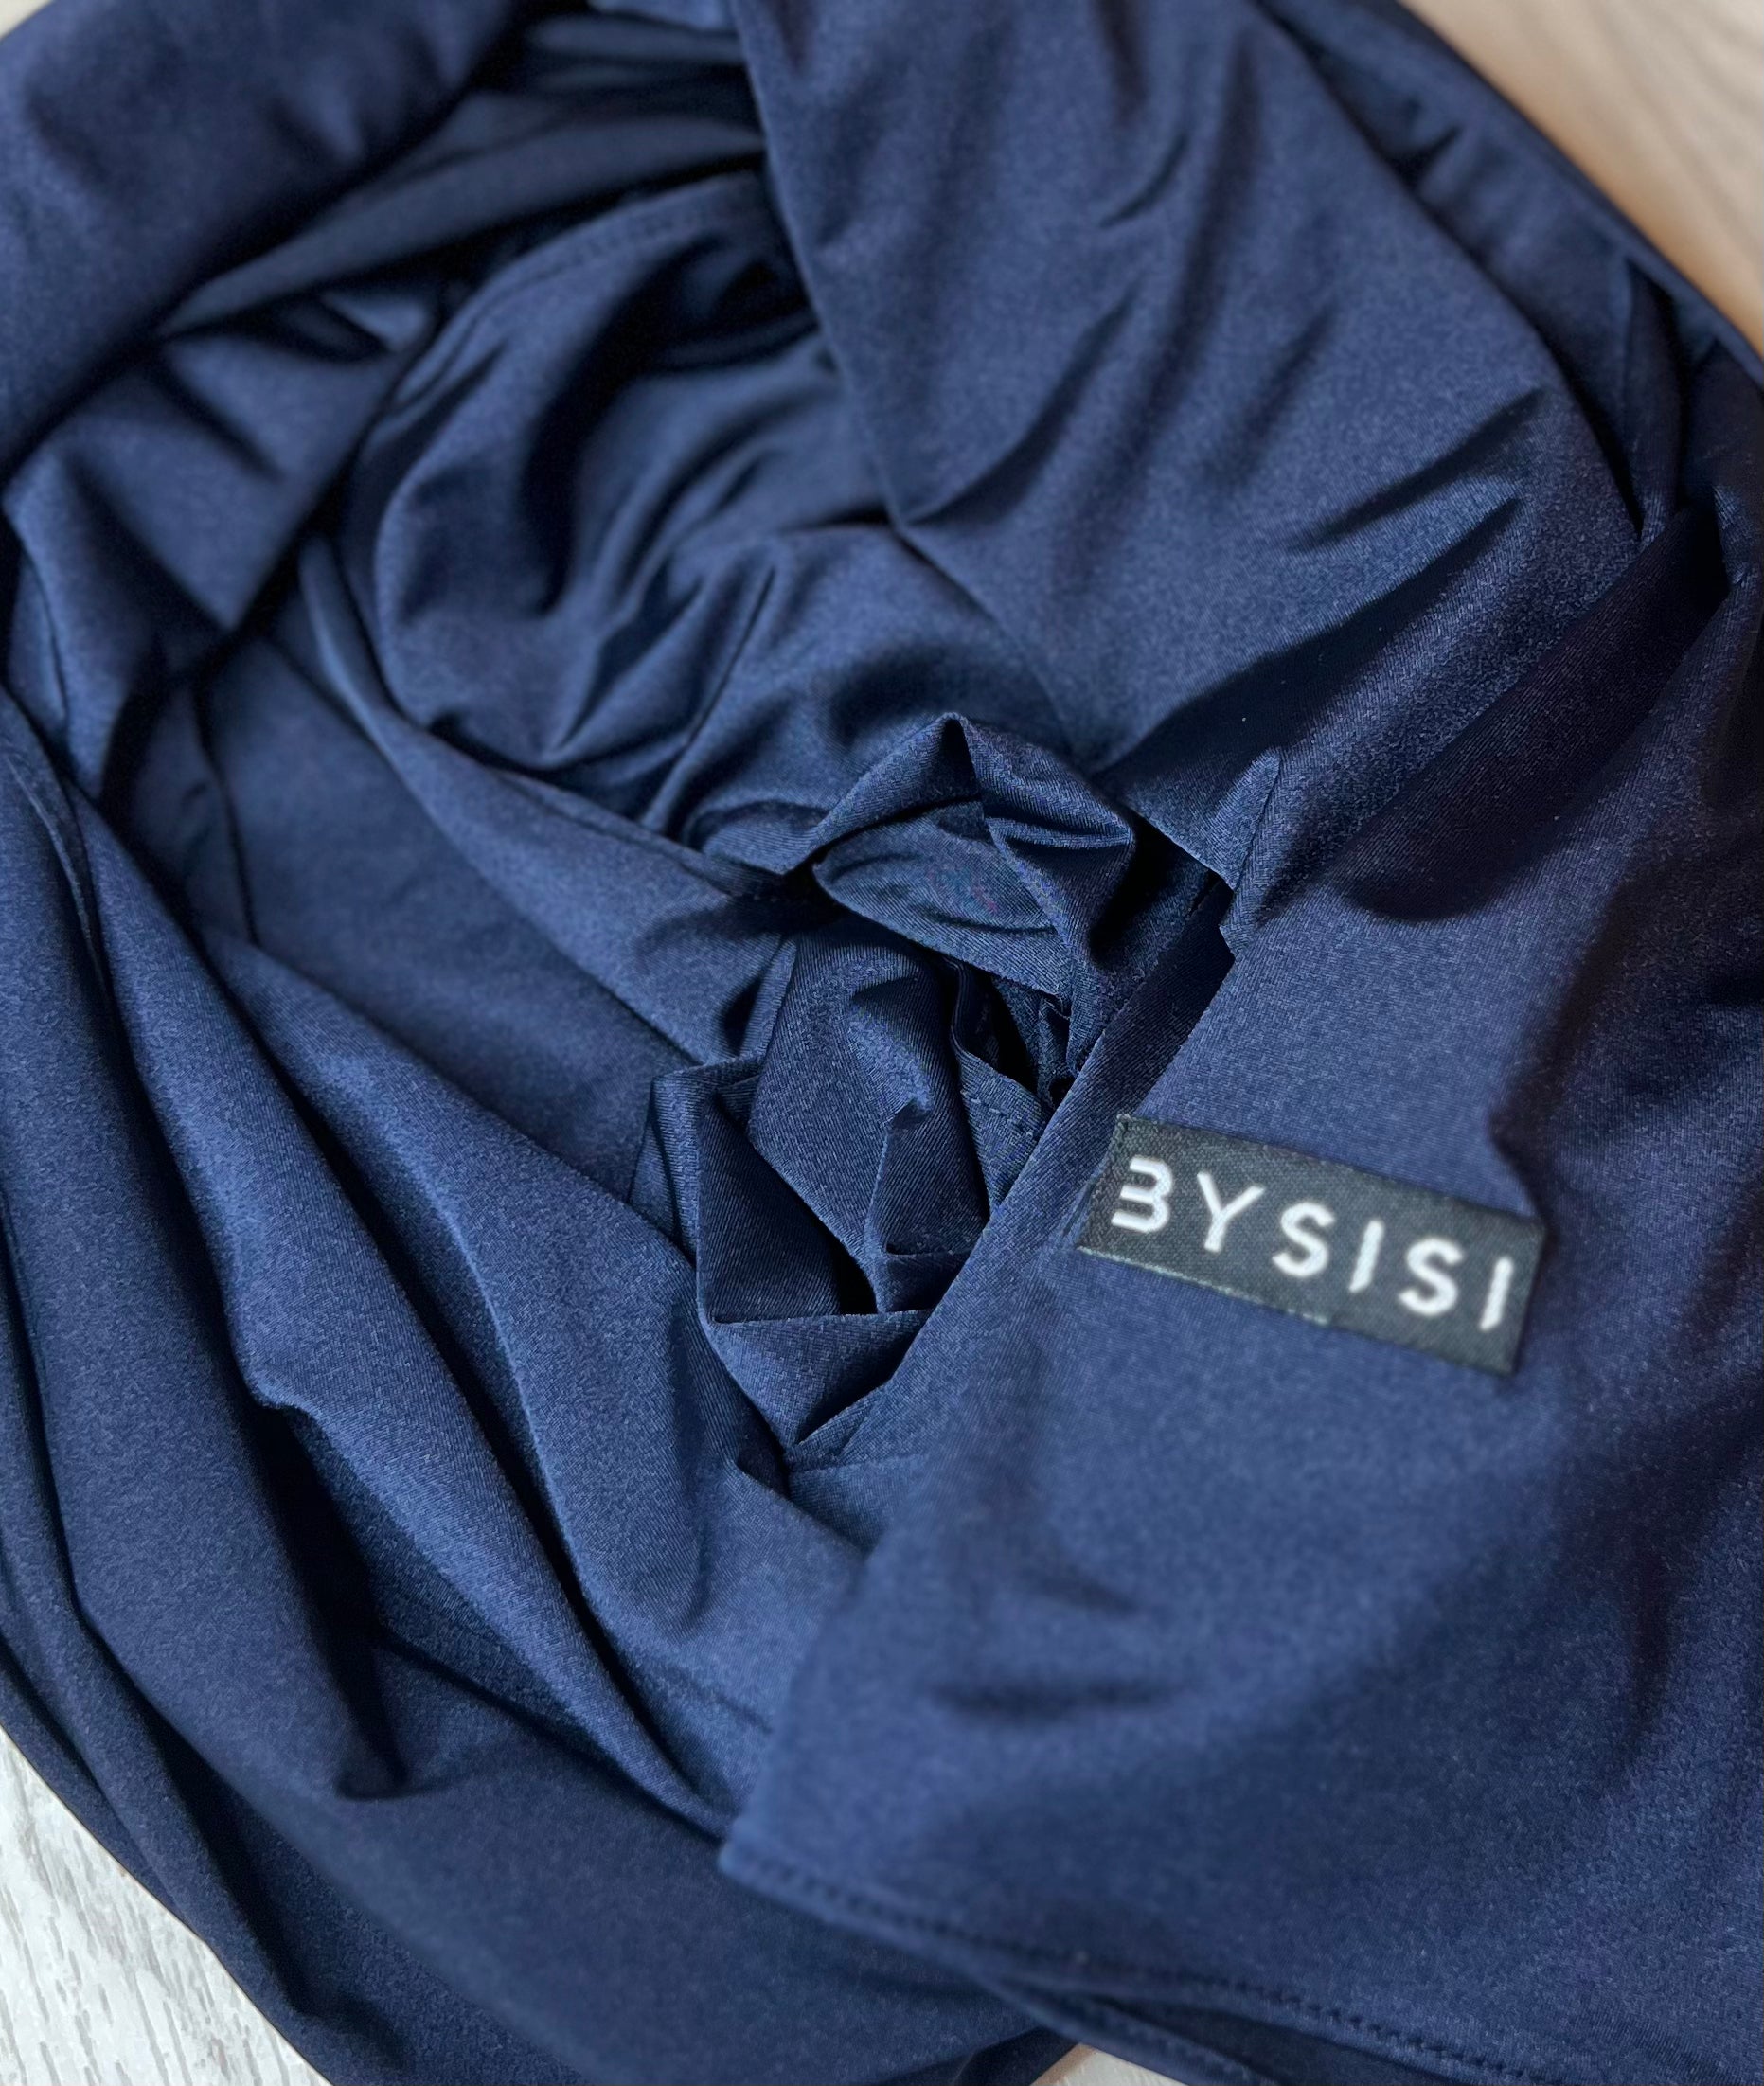 Satin Jersey in Navy - BYSISI